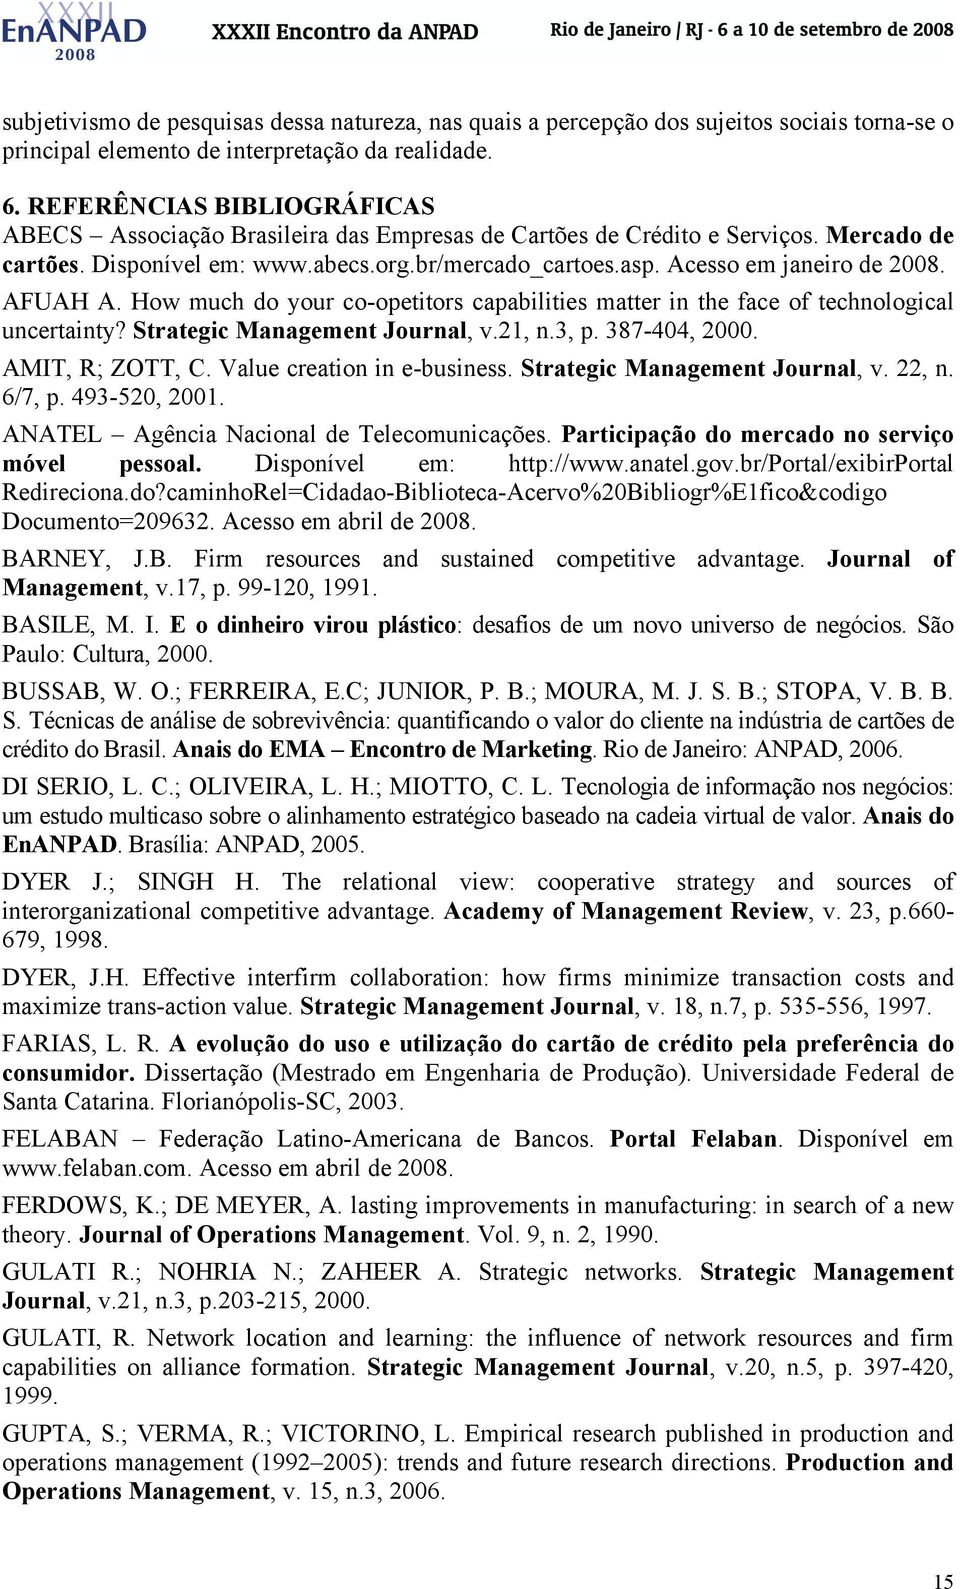 Acesso em janeiro de 2008. AFUAH A. How much do your co-opetitors capabilities matter in the face of technological uncertainty? Strategic Management Journal, v.21, n.3, p. 387-404, 2000.